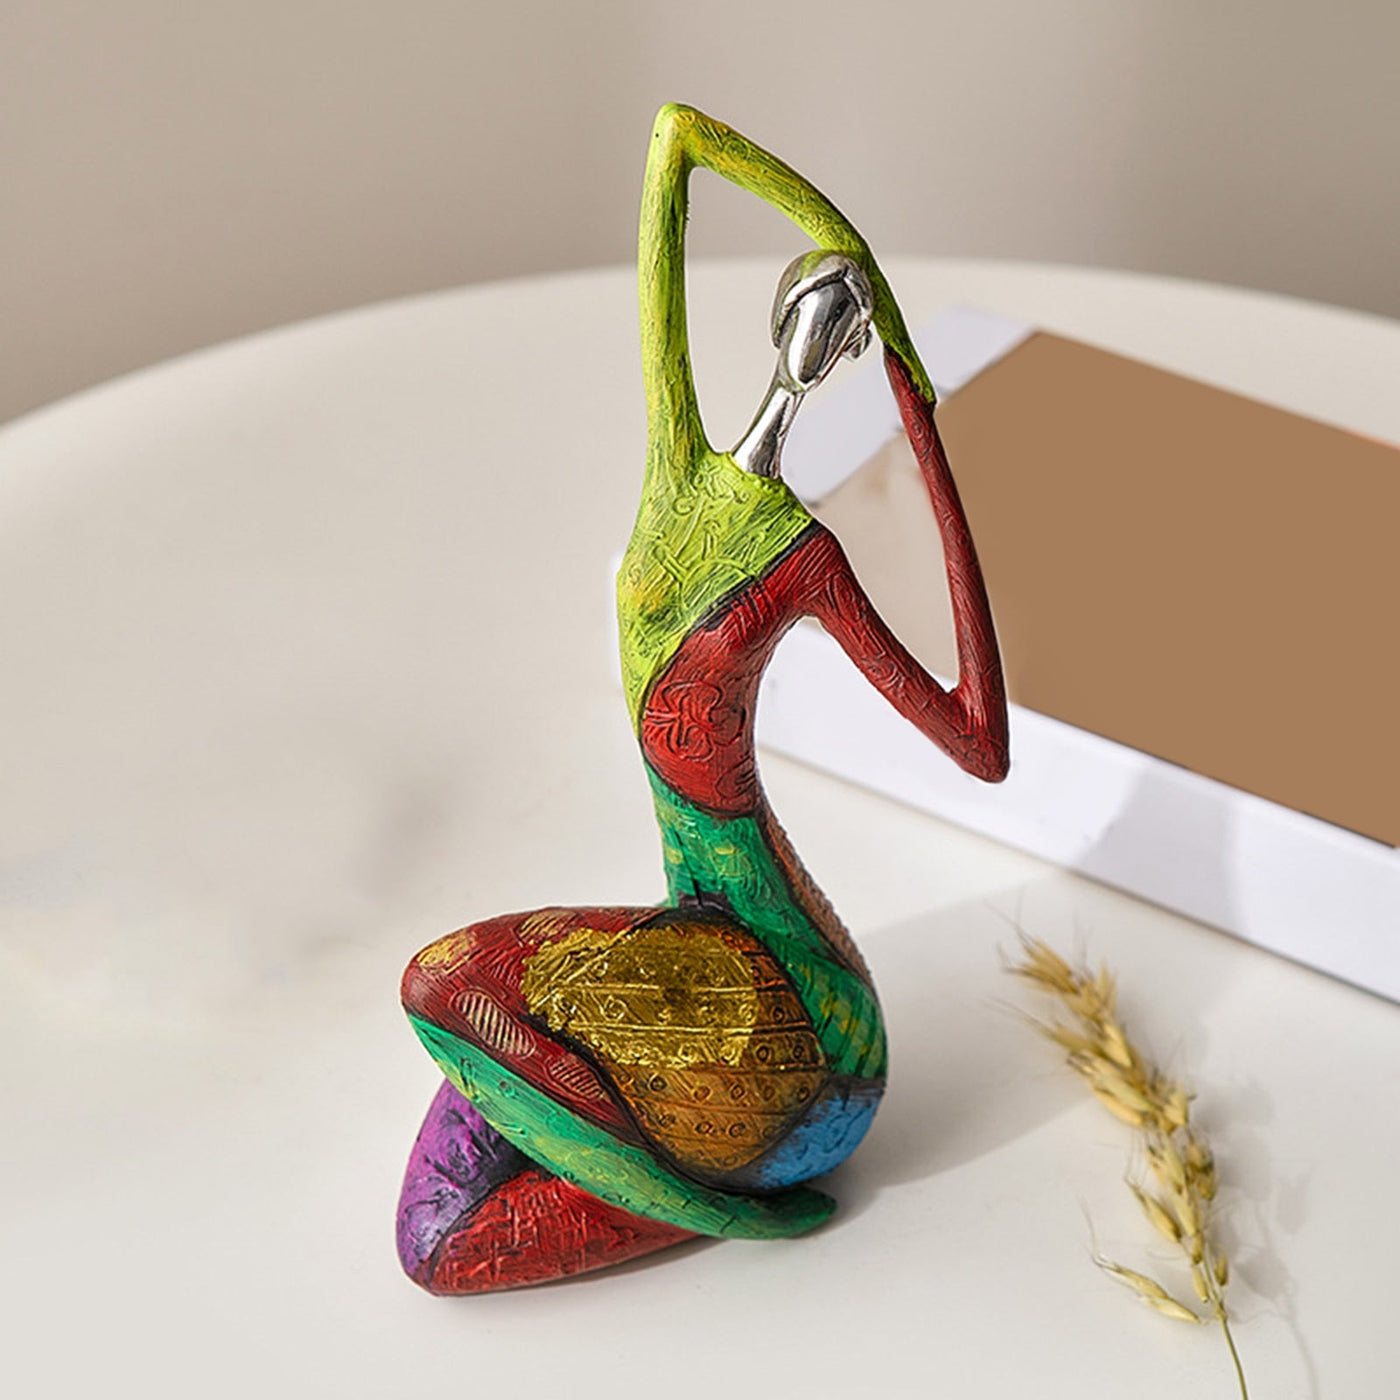 Modern Art Figurine Resin Desktop Decoration Colorful Abstract Women Yoga Figure Statue for Living Room Decorative Ornament Hand Cratfed - Statnmore-7861